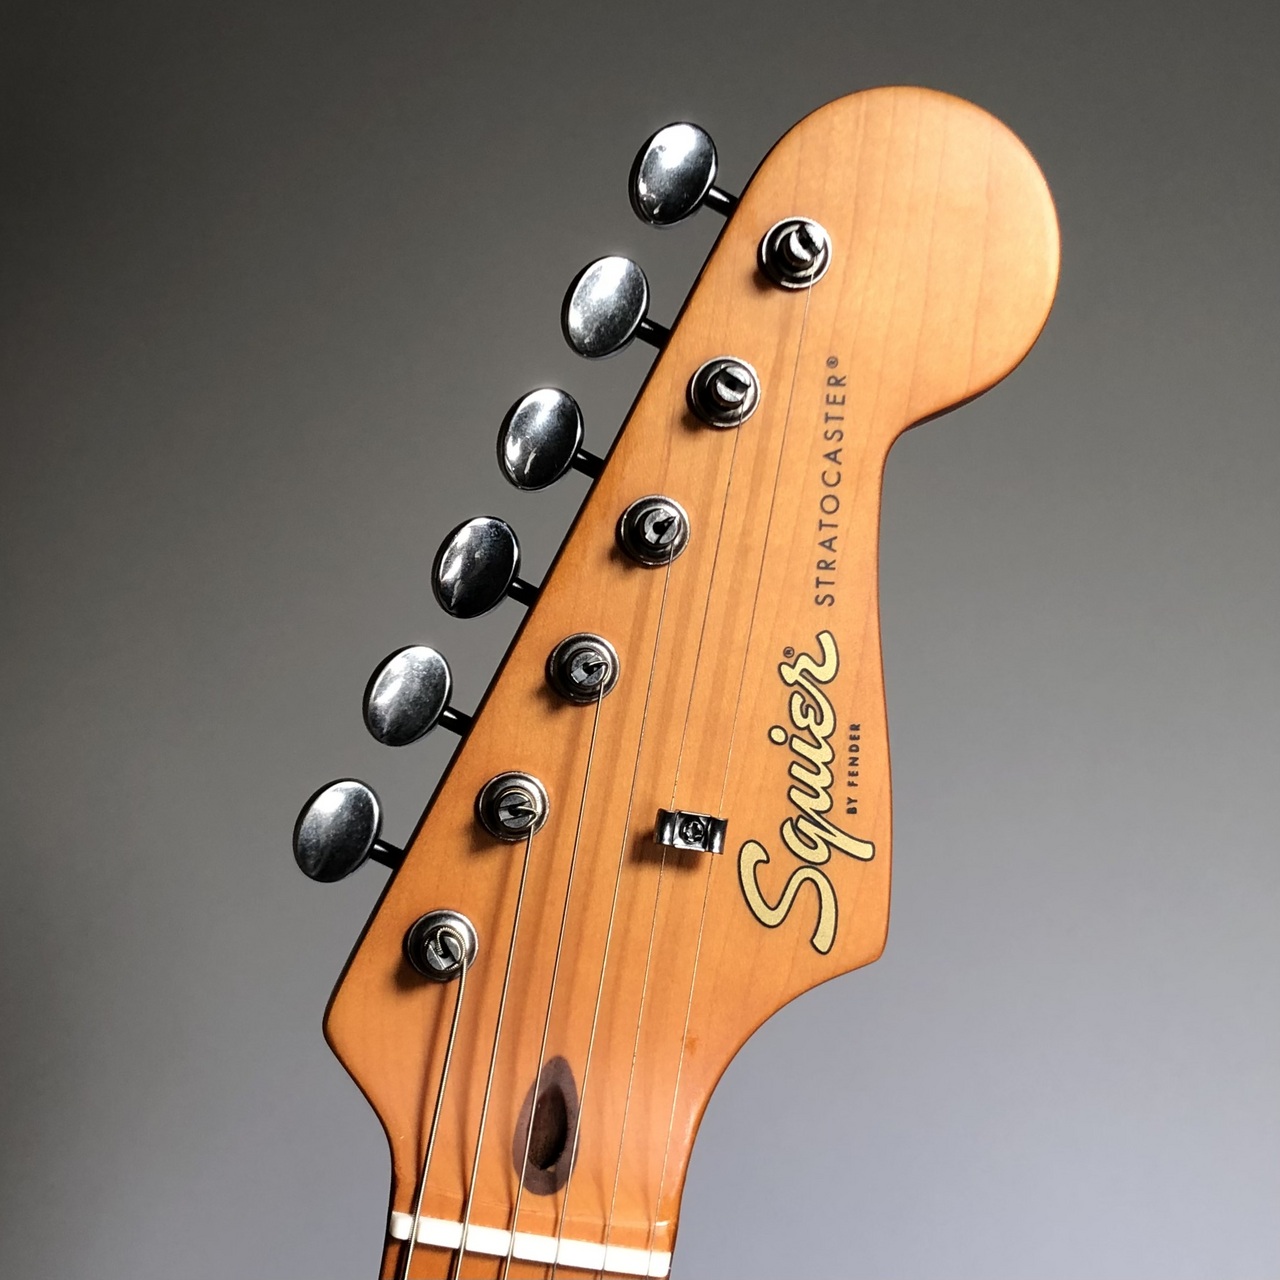 Squier by Fender (スクワイアバイフェンダー)40th Anniversary